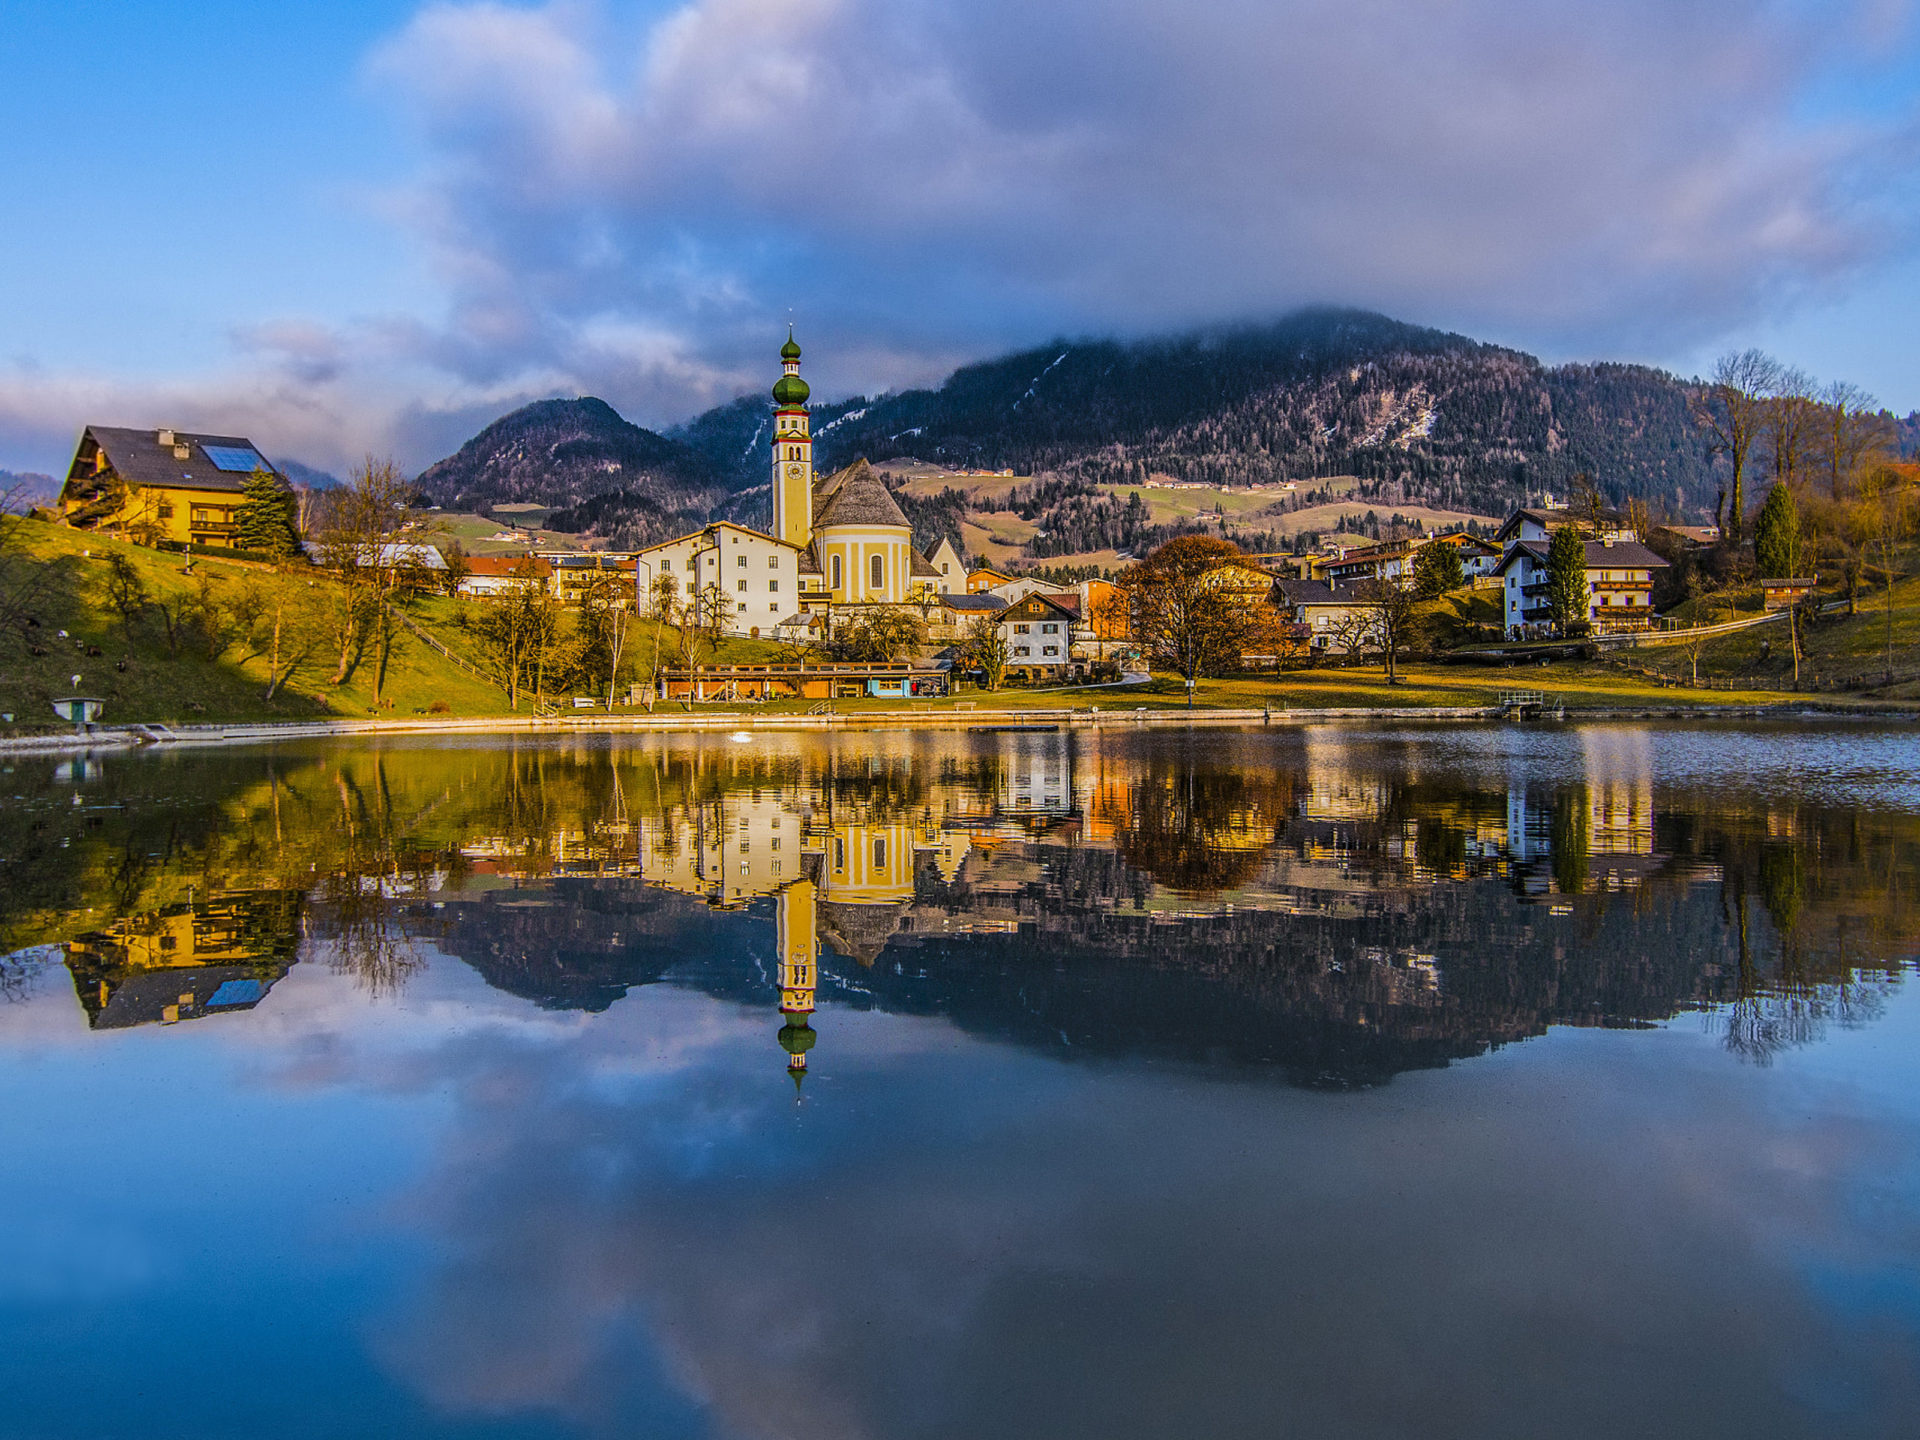 Austria: Innsbruck, City In The Alps, Capital Of The Country's Western Tyrol. 1920x1440 HD Wallpaper.